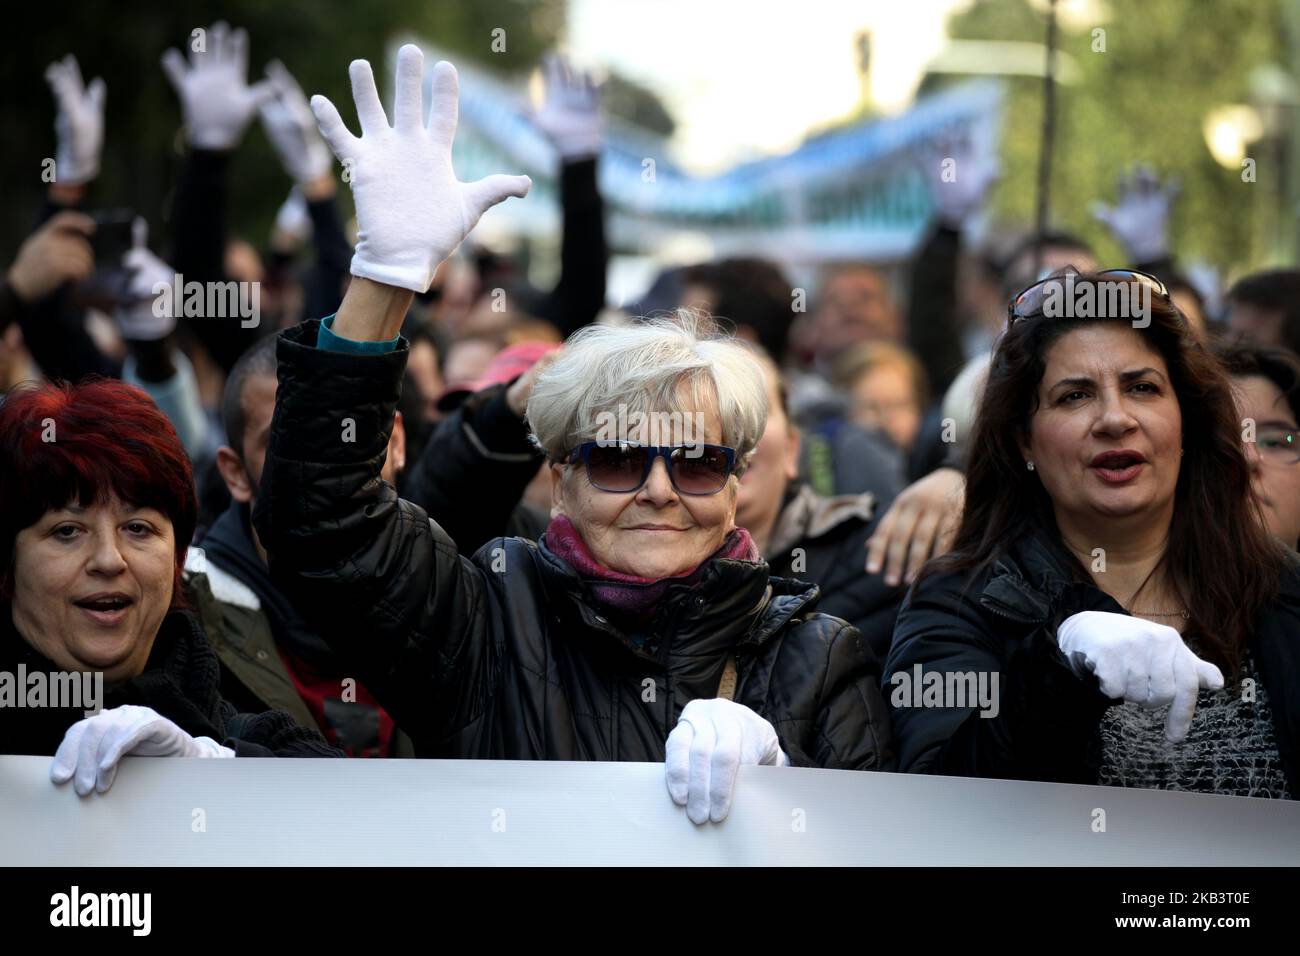 Protesters wear white gloves and use sign language during a protest for disabled rights on the occasion of the International Day for Persons with Disabilities in Athens, Greece on December 3, 2018. Protesters demand wage and social welfare since they have been eliminated by years of austerity measures. (Photo by Giorgos Georgiou/NurPhoto) Stock Photo